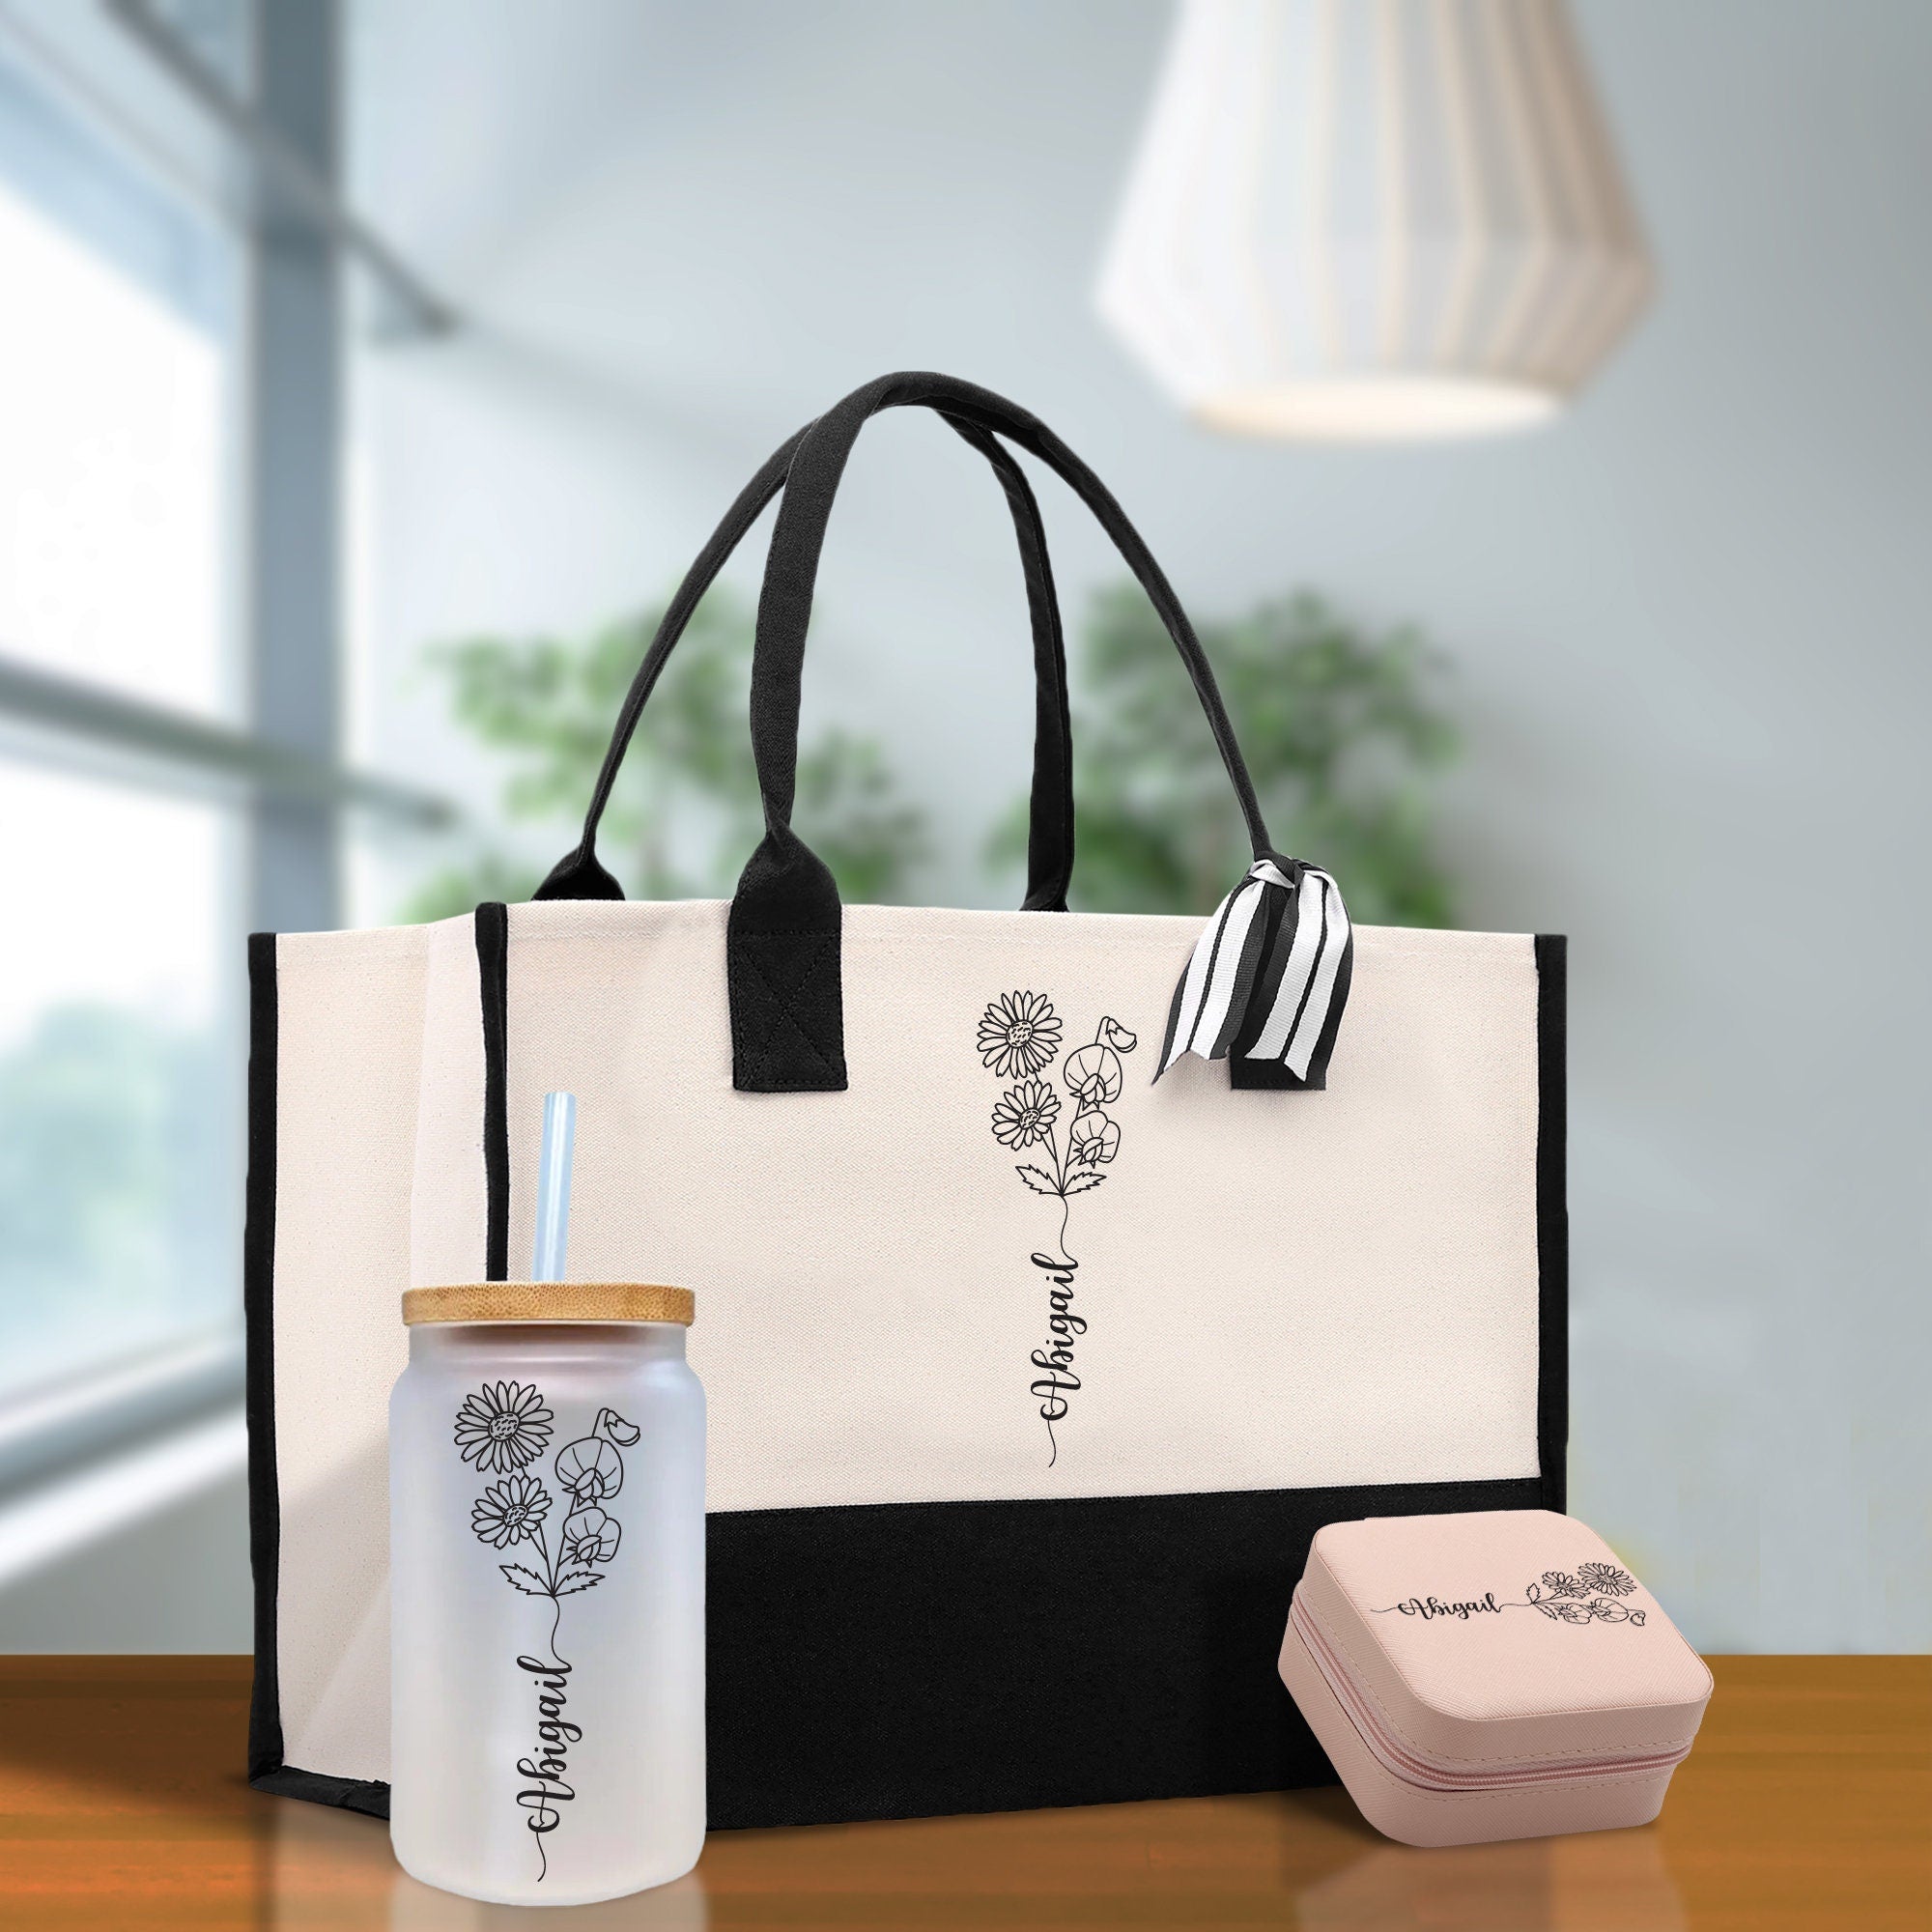 a black and white tote bag, a bottle, and a cup on a